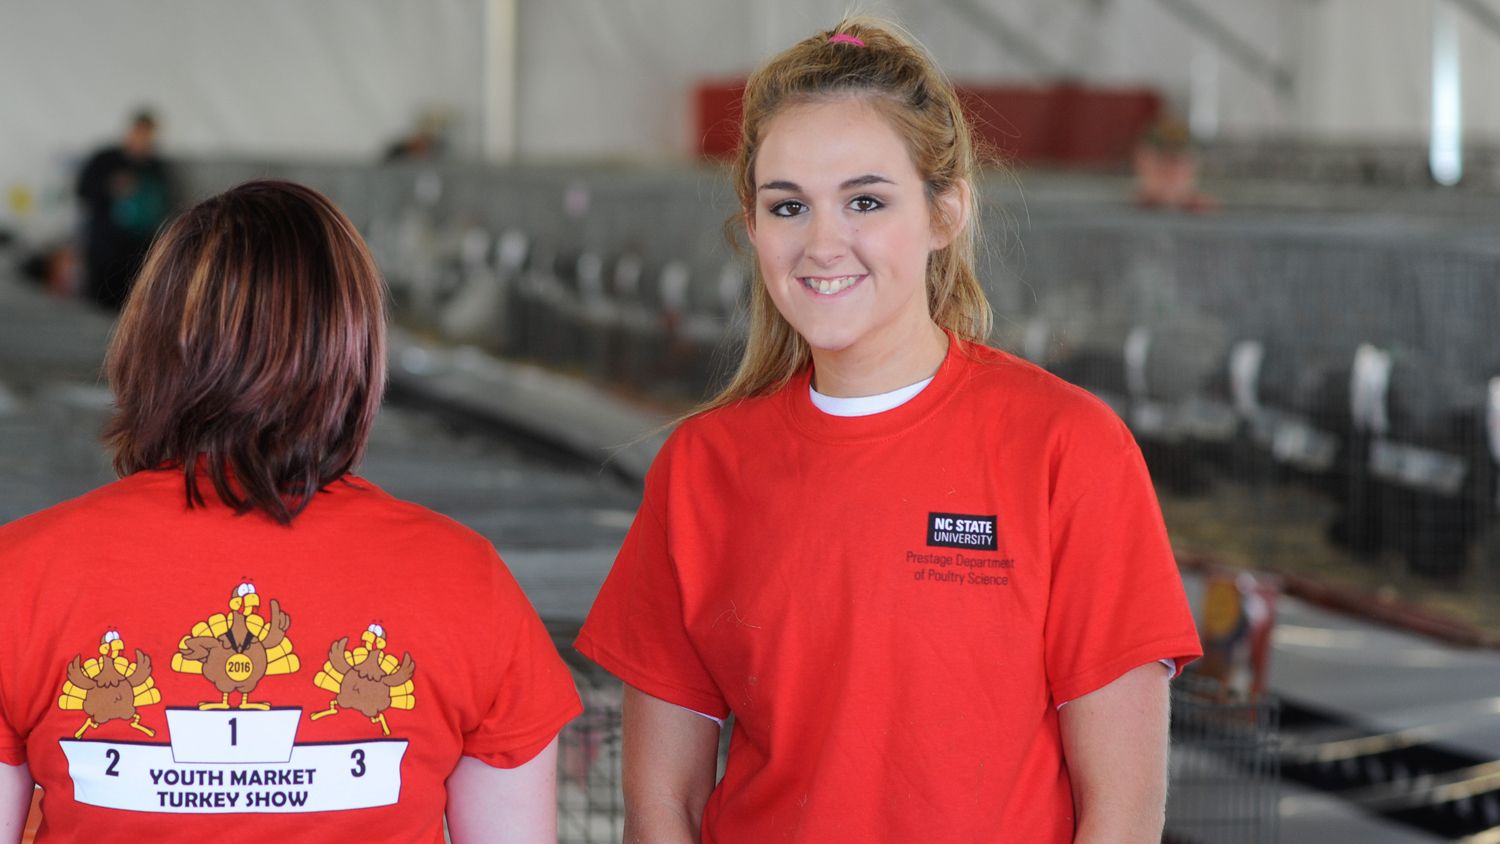 NC State students at the North Carolina State Fair's turkey exhibit